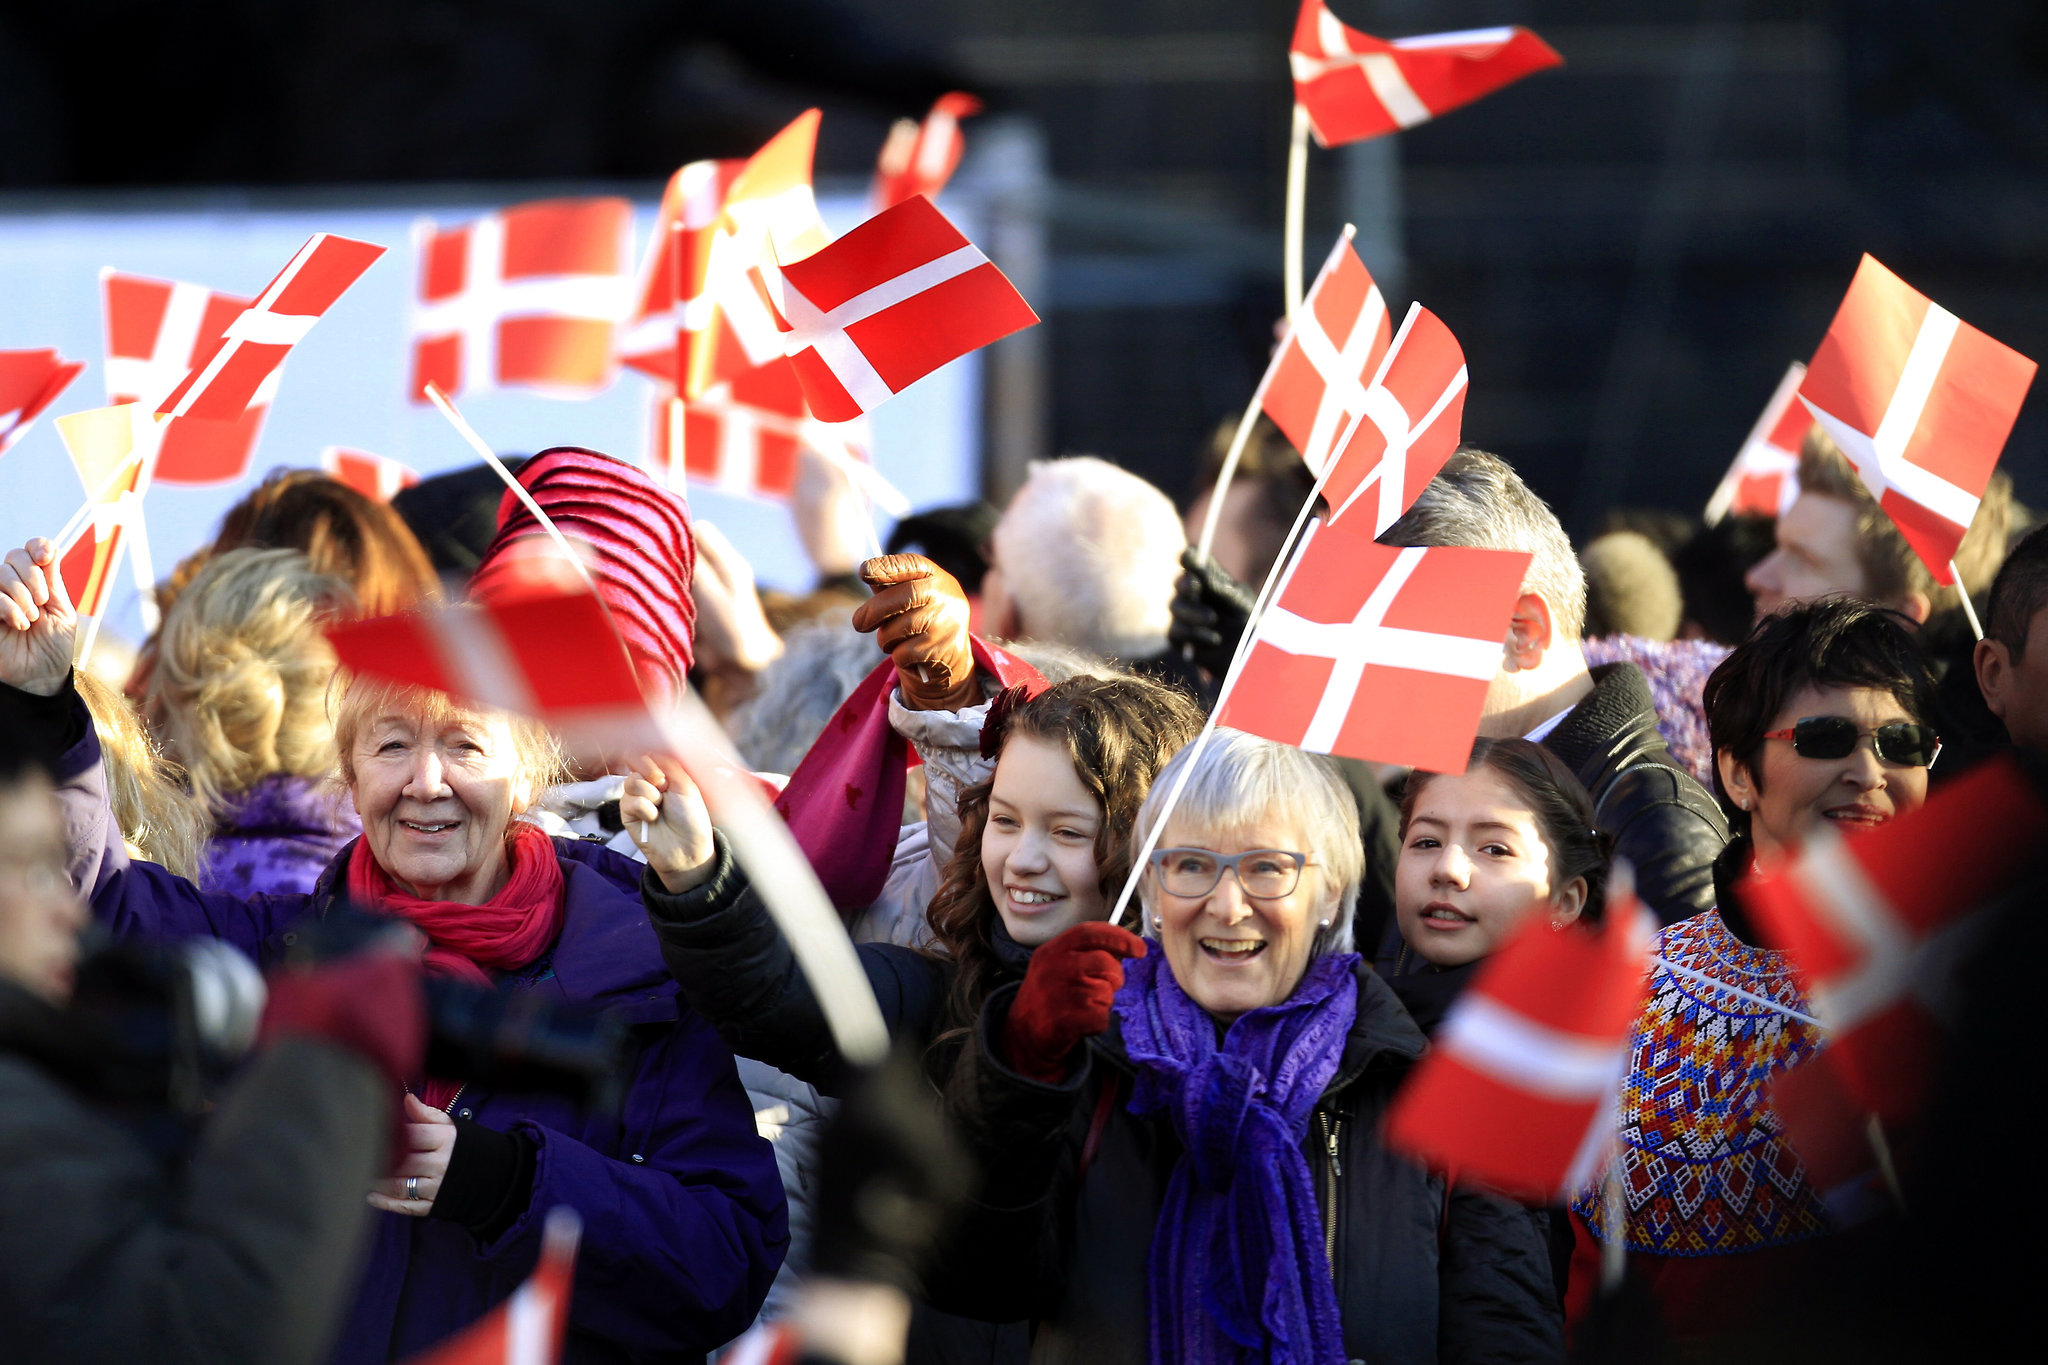 Surprising Facts About Denmark-Denmark is accounted for to be the most joyful country on the planet